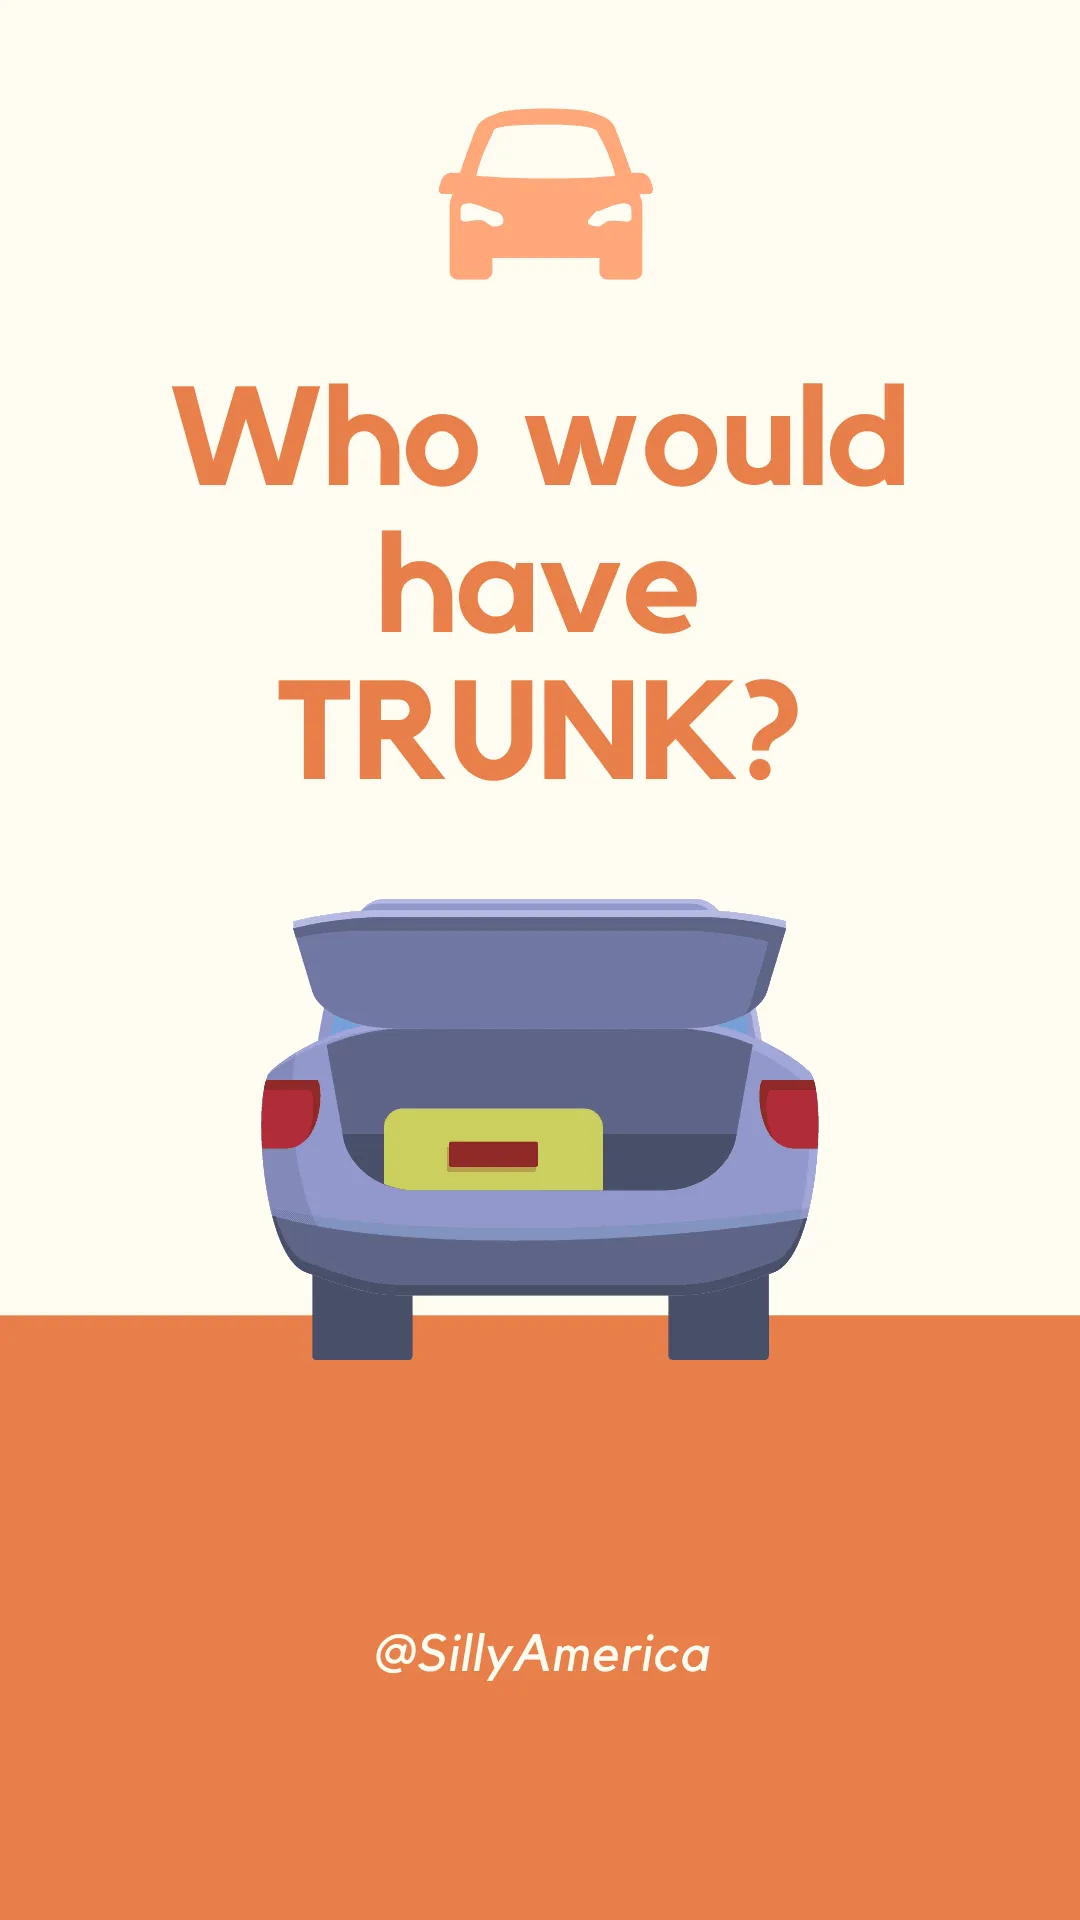 Who would have TRUNK? - Car Puns to fuel your road trip content!